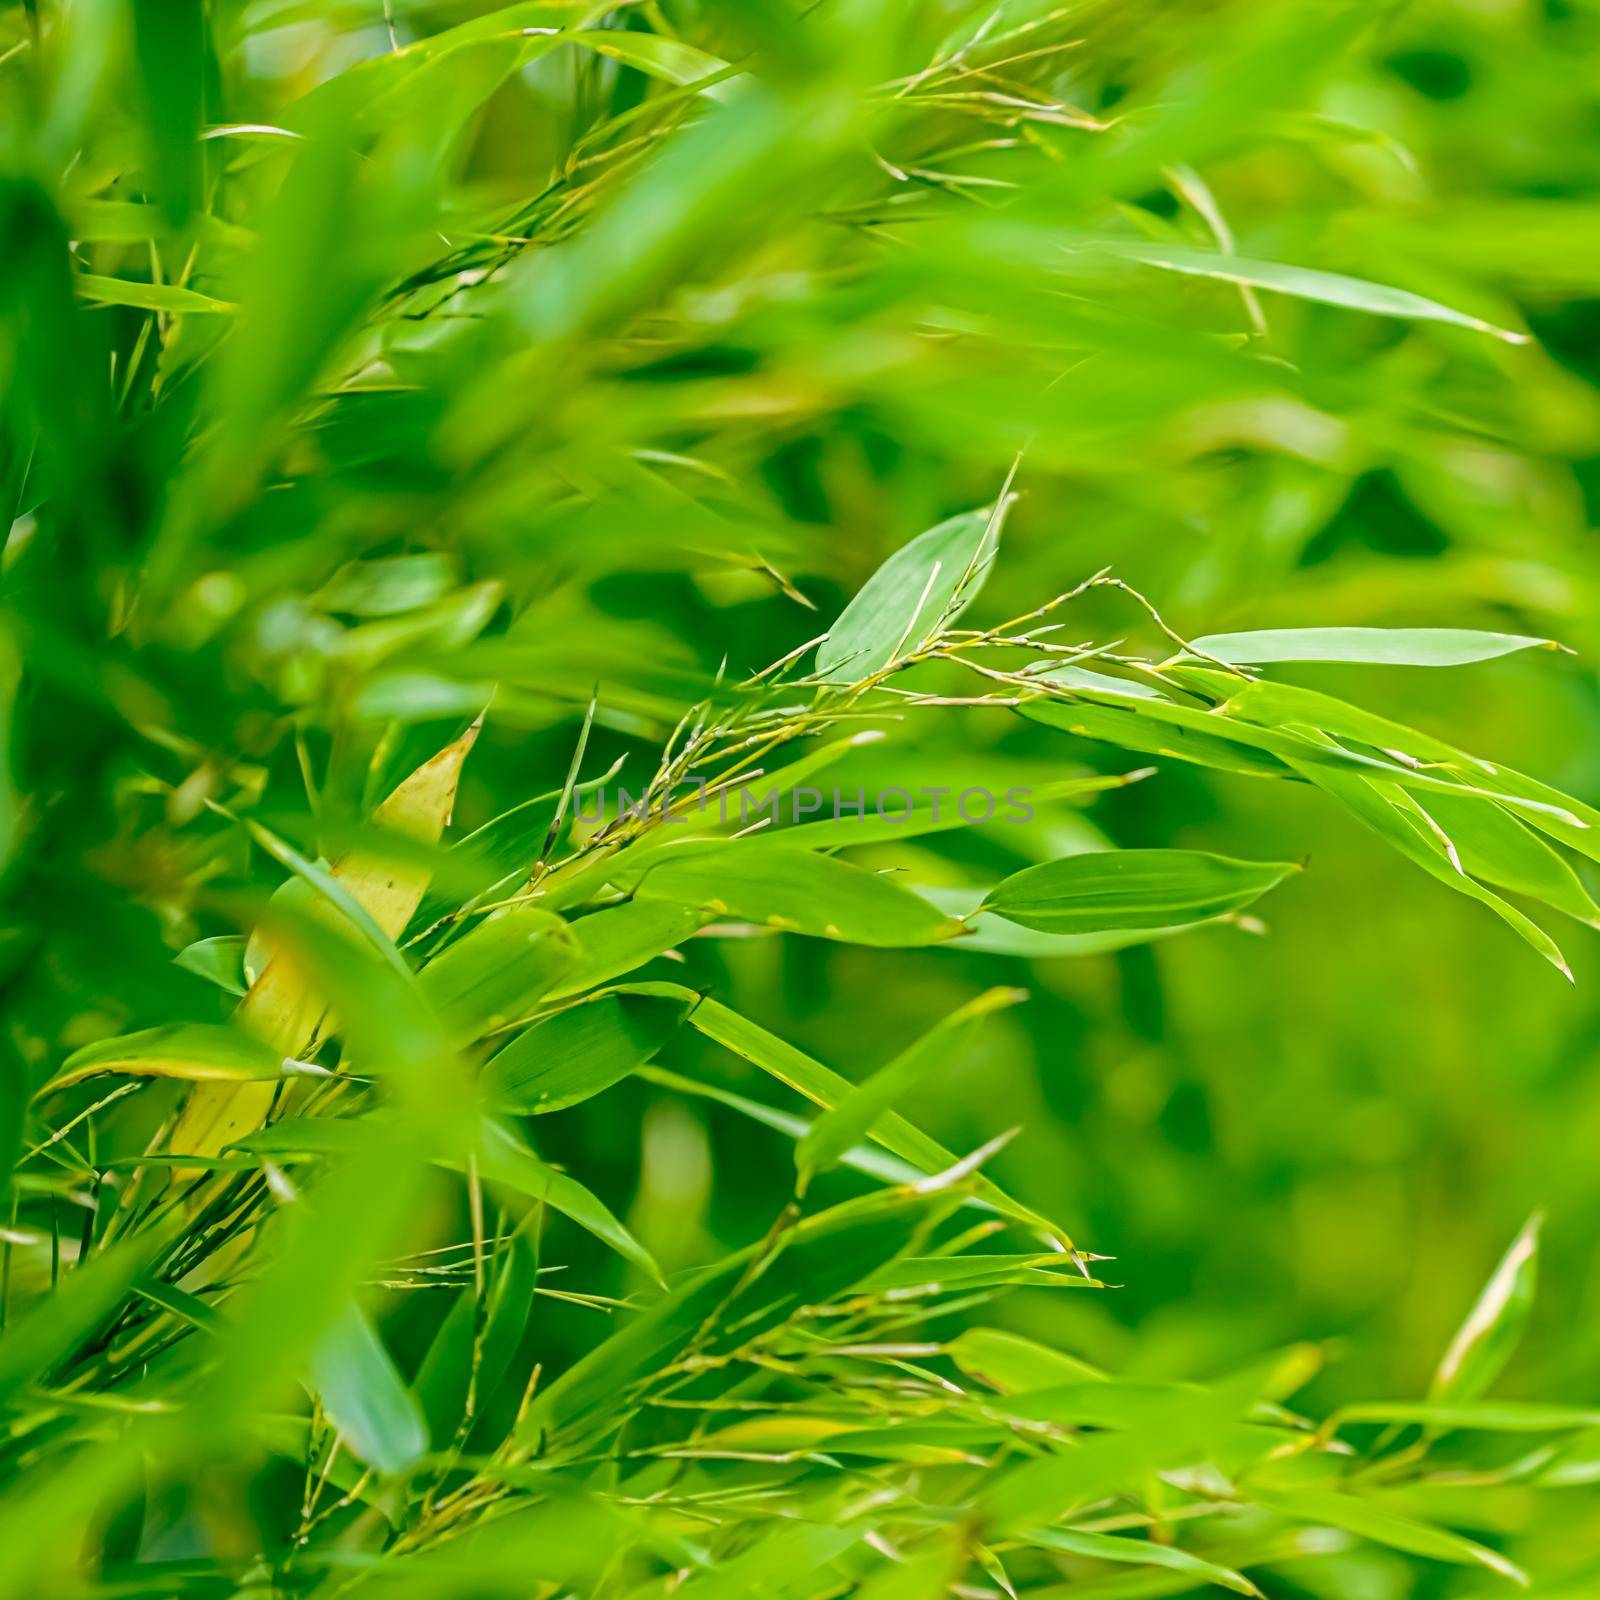 Green bamboo background, fresh leaves on tree as nature, ecology and environment concept.